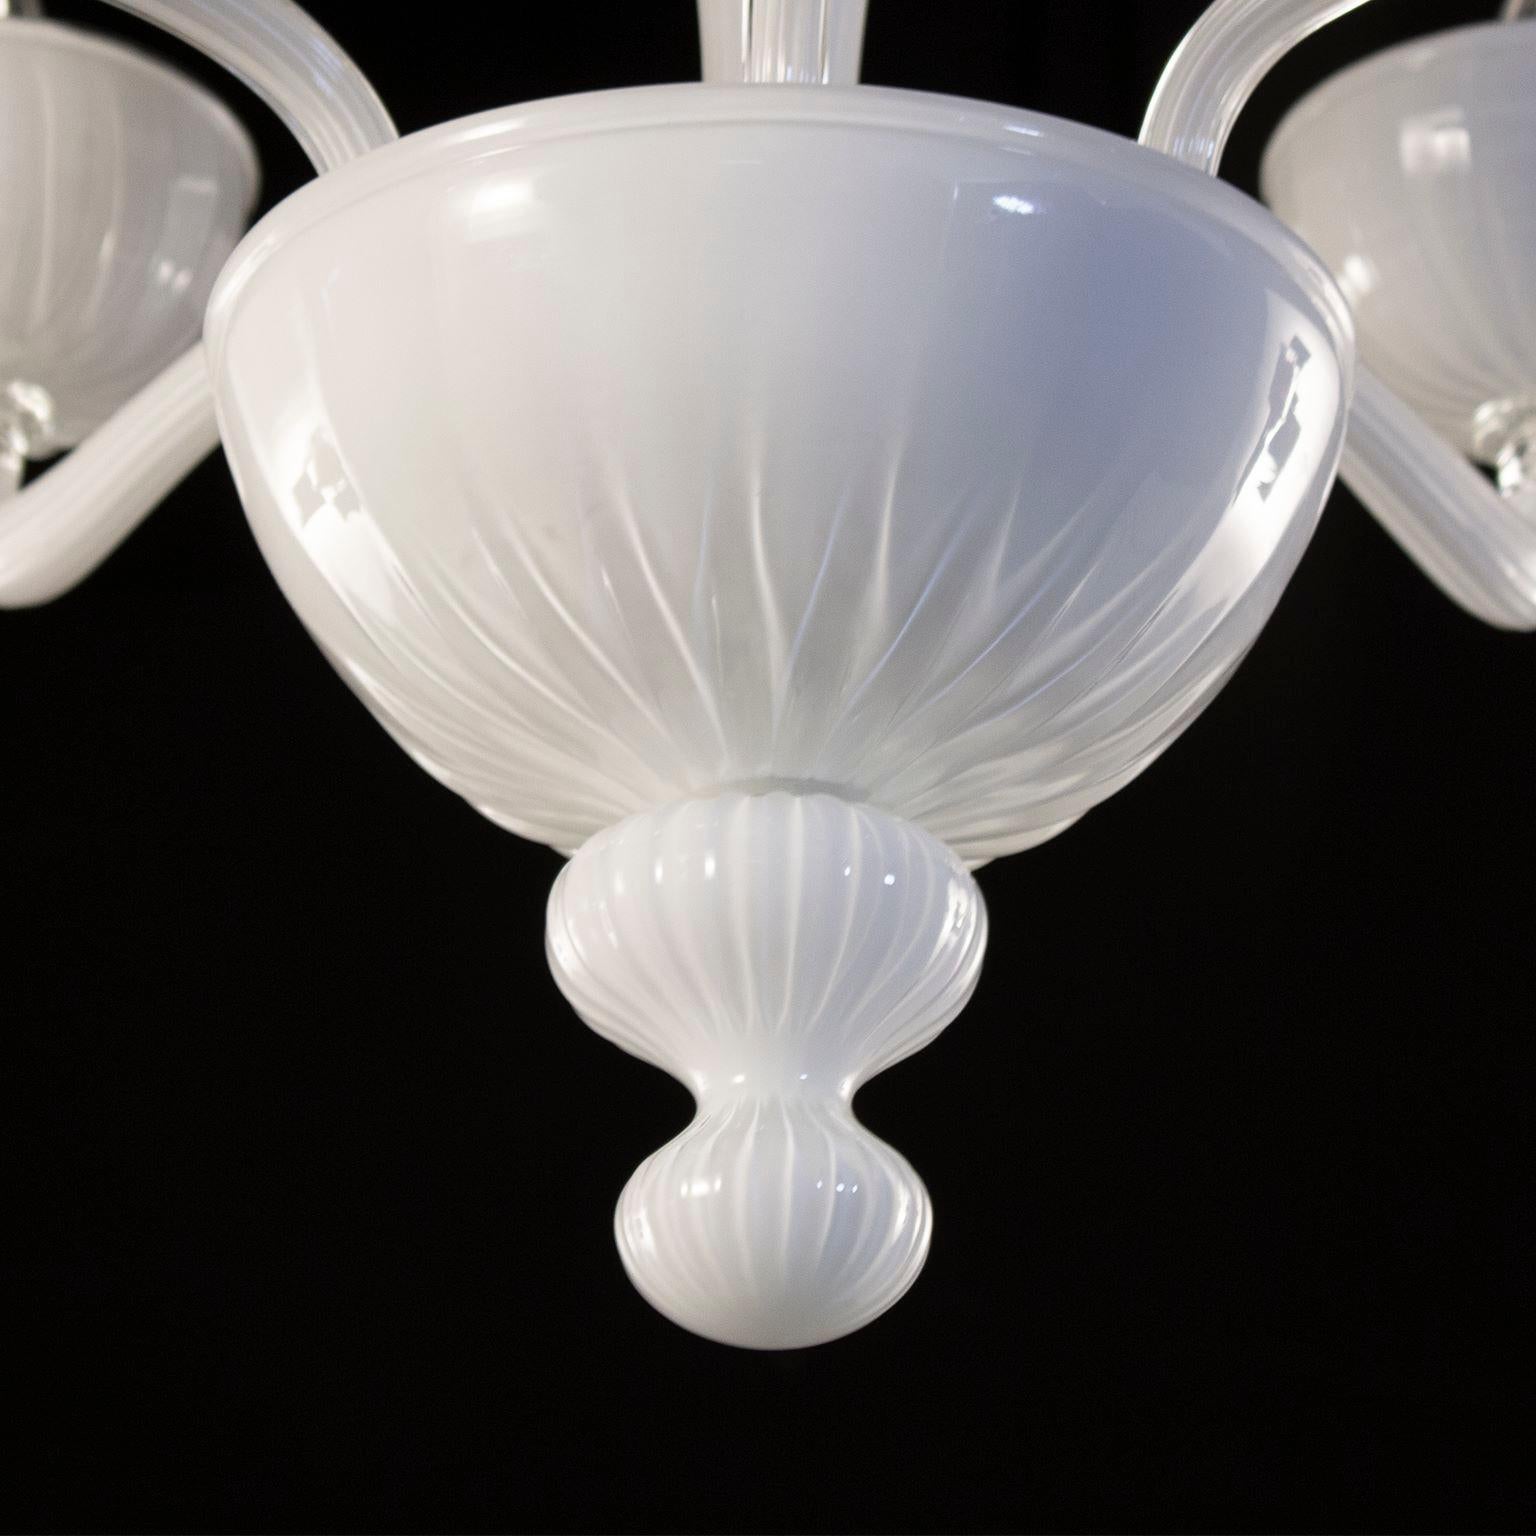 Rigadin Chandelier 6 Arms White Encased Murano Glass Edgar by Multiforme In New Condition For Sale In Trebaseleghe, IT